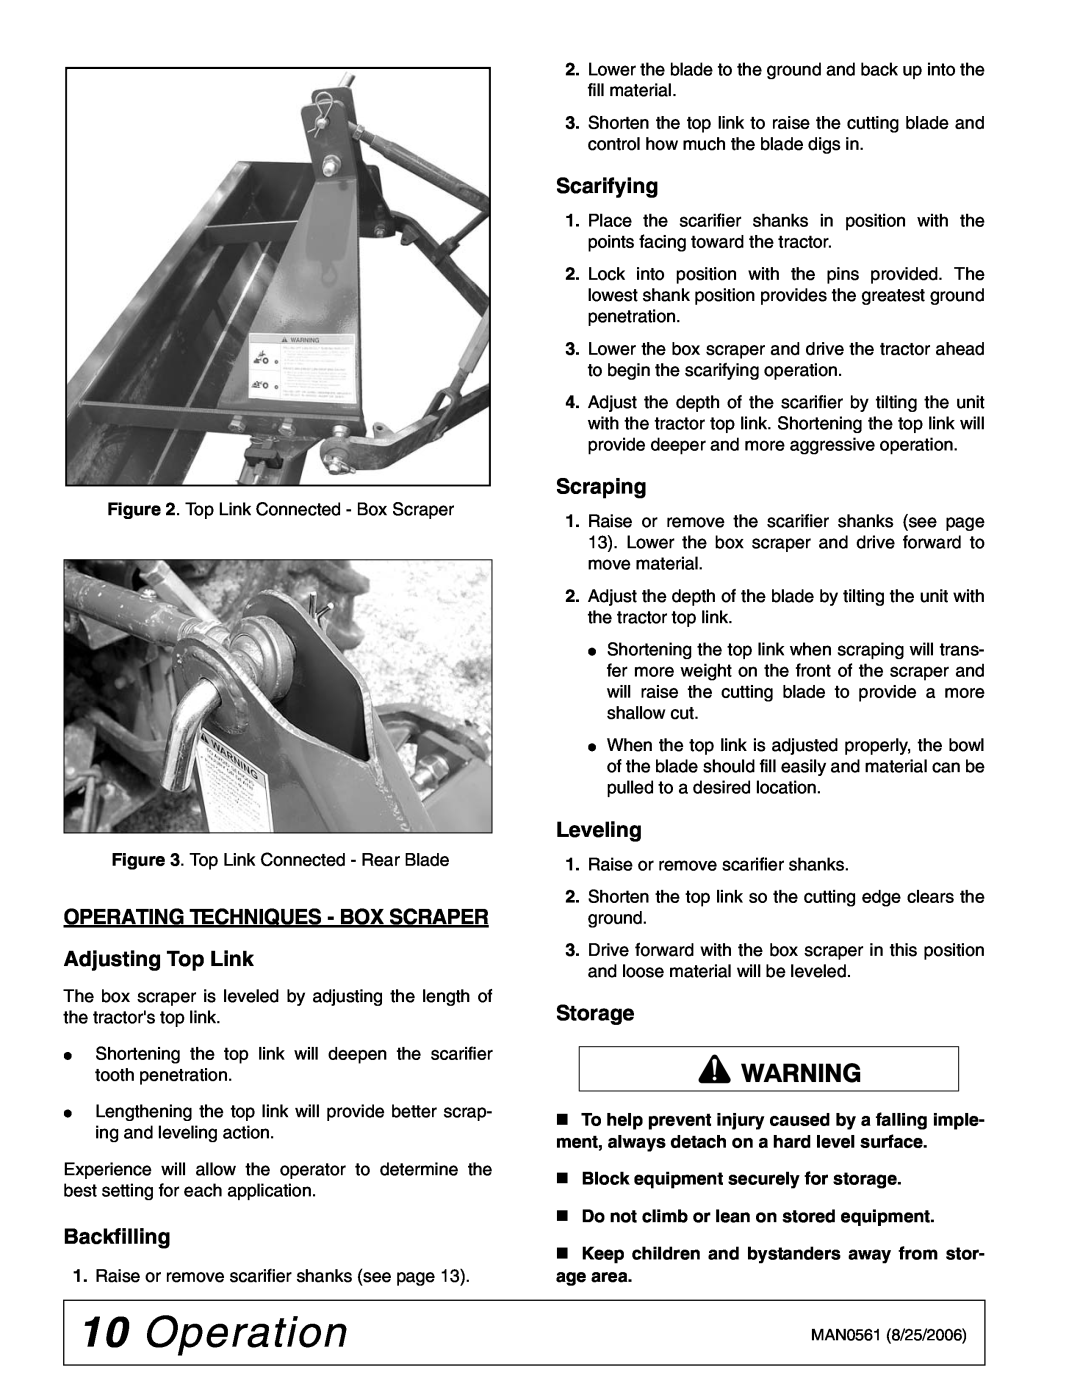 Woods Equipment RBE4 Operation, Operating Techniques - Box Scraper, Adjusting Top Link, Backfilling, Scarifying, Scraping 